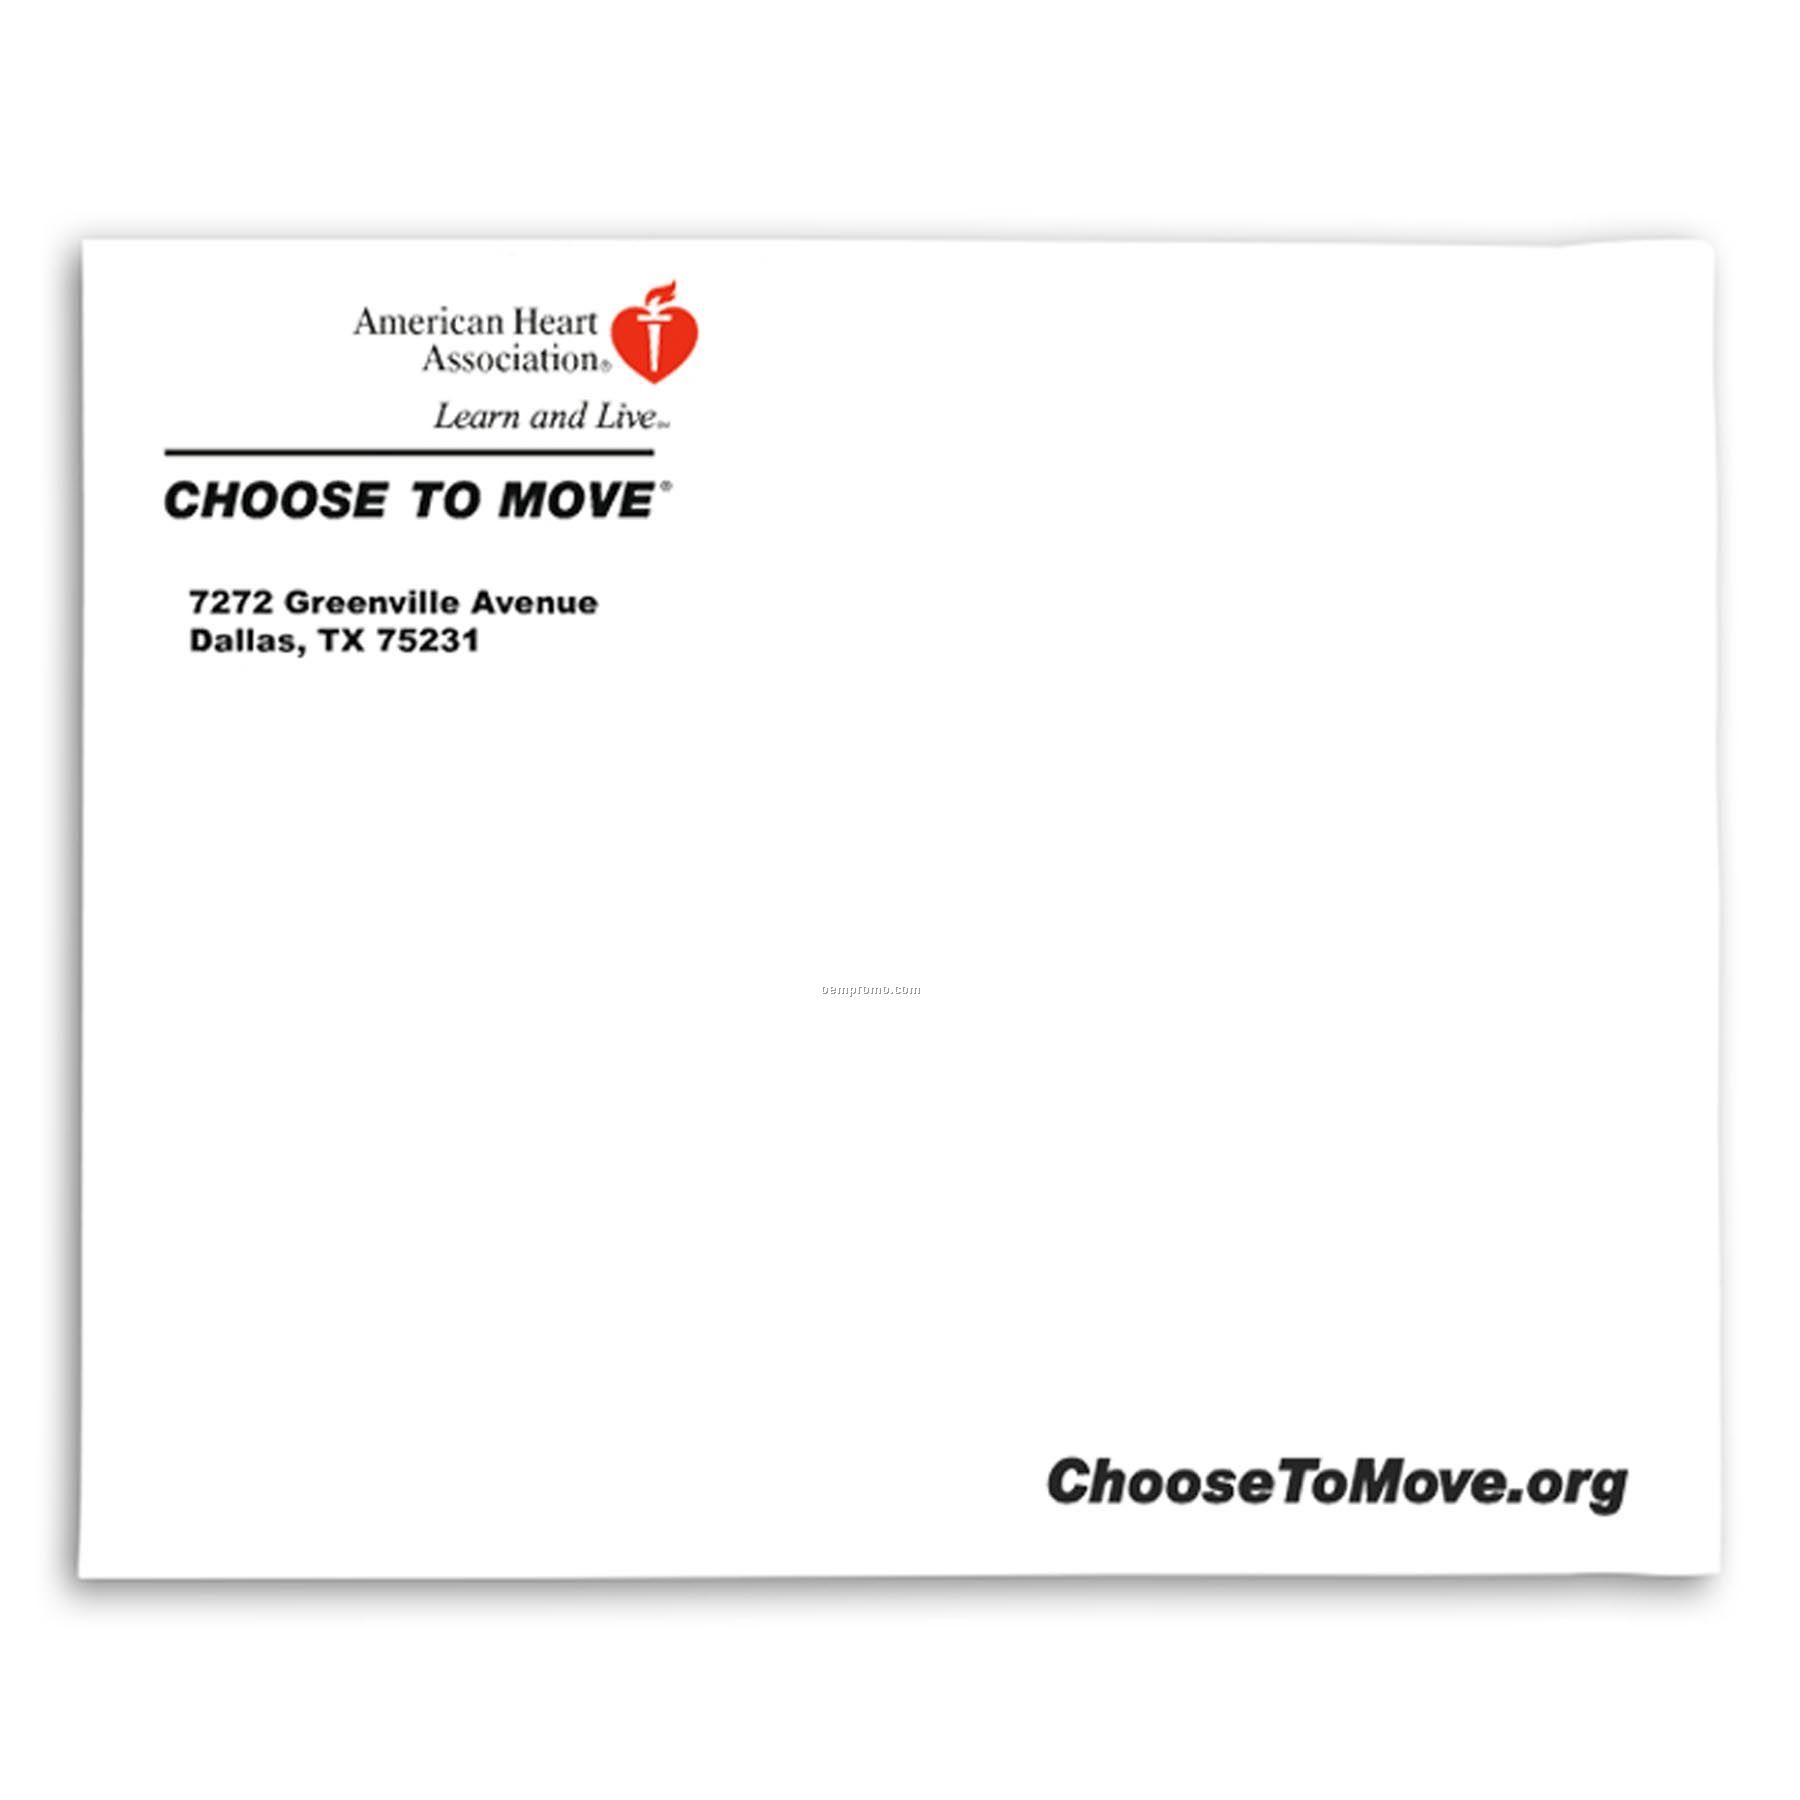 Co-extruded Mailer Envelope (13"X16"+3")